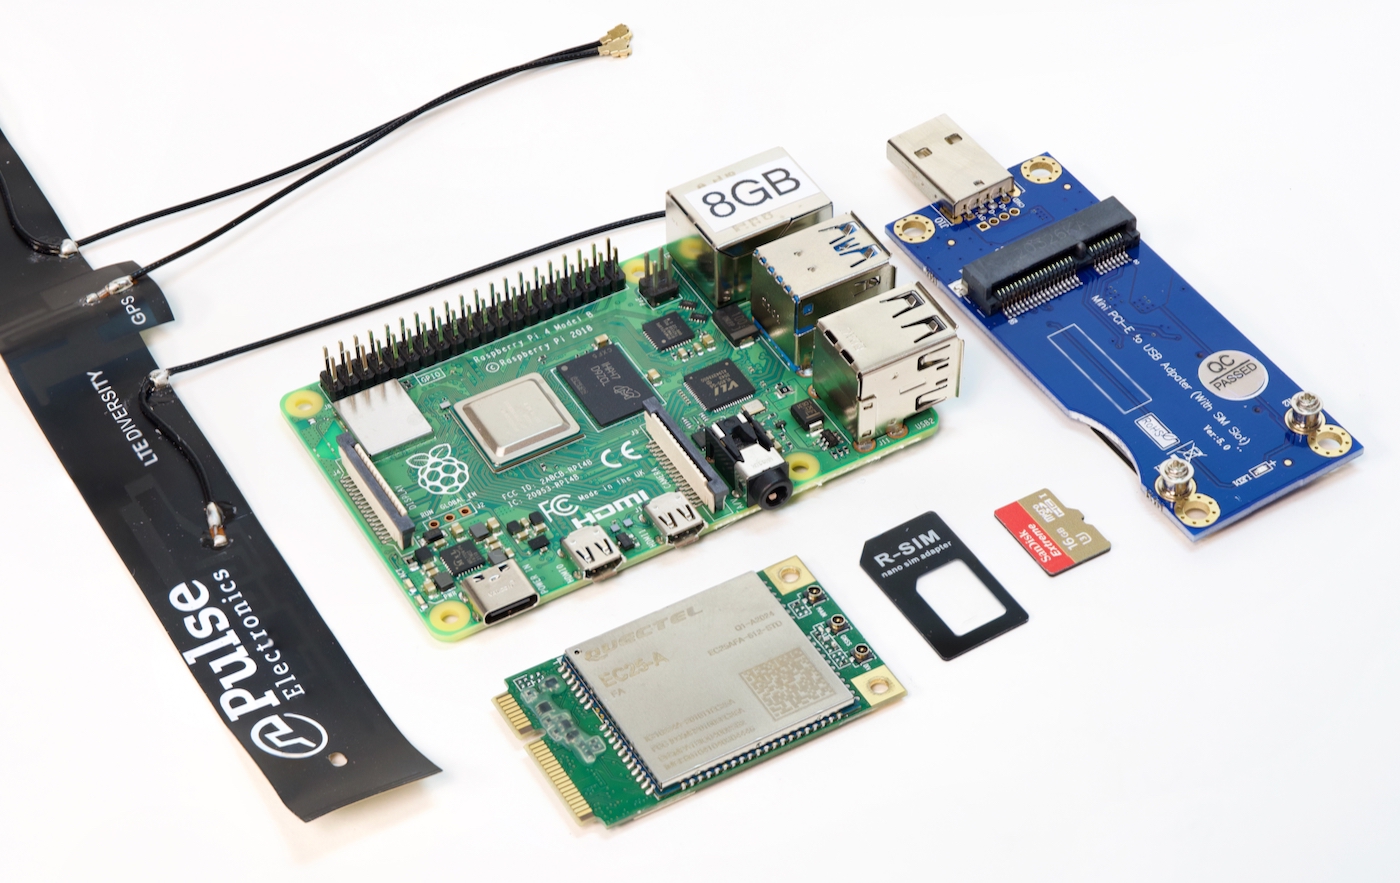 4G LTE wireless modems on a Raspberry Pi | Jeff Geerling